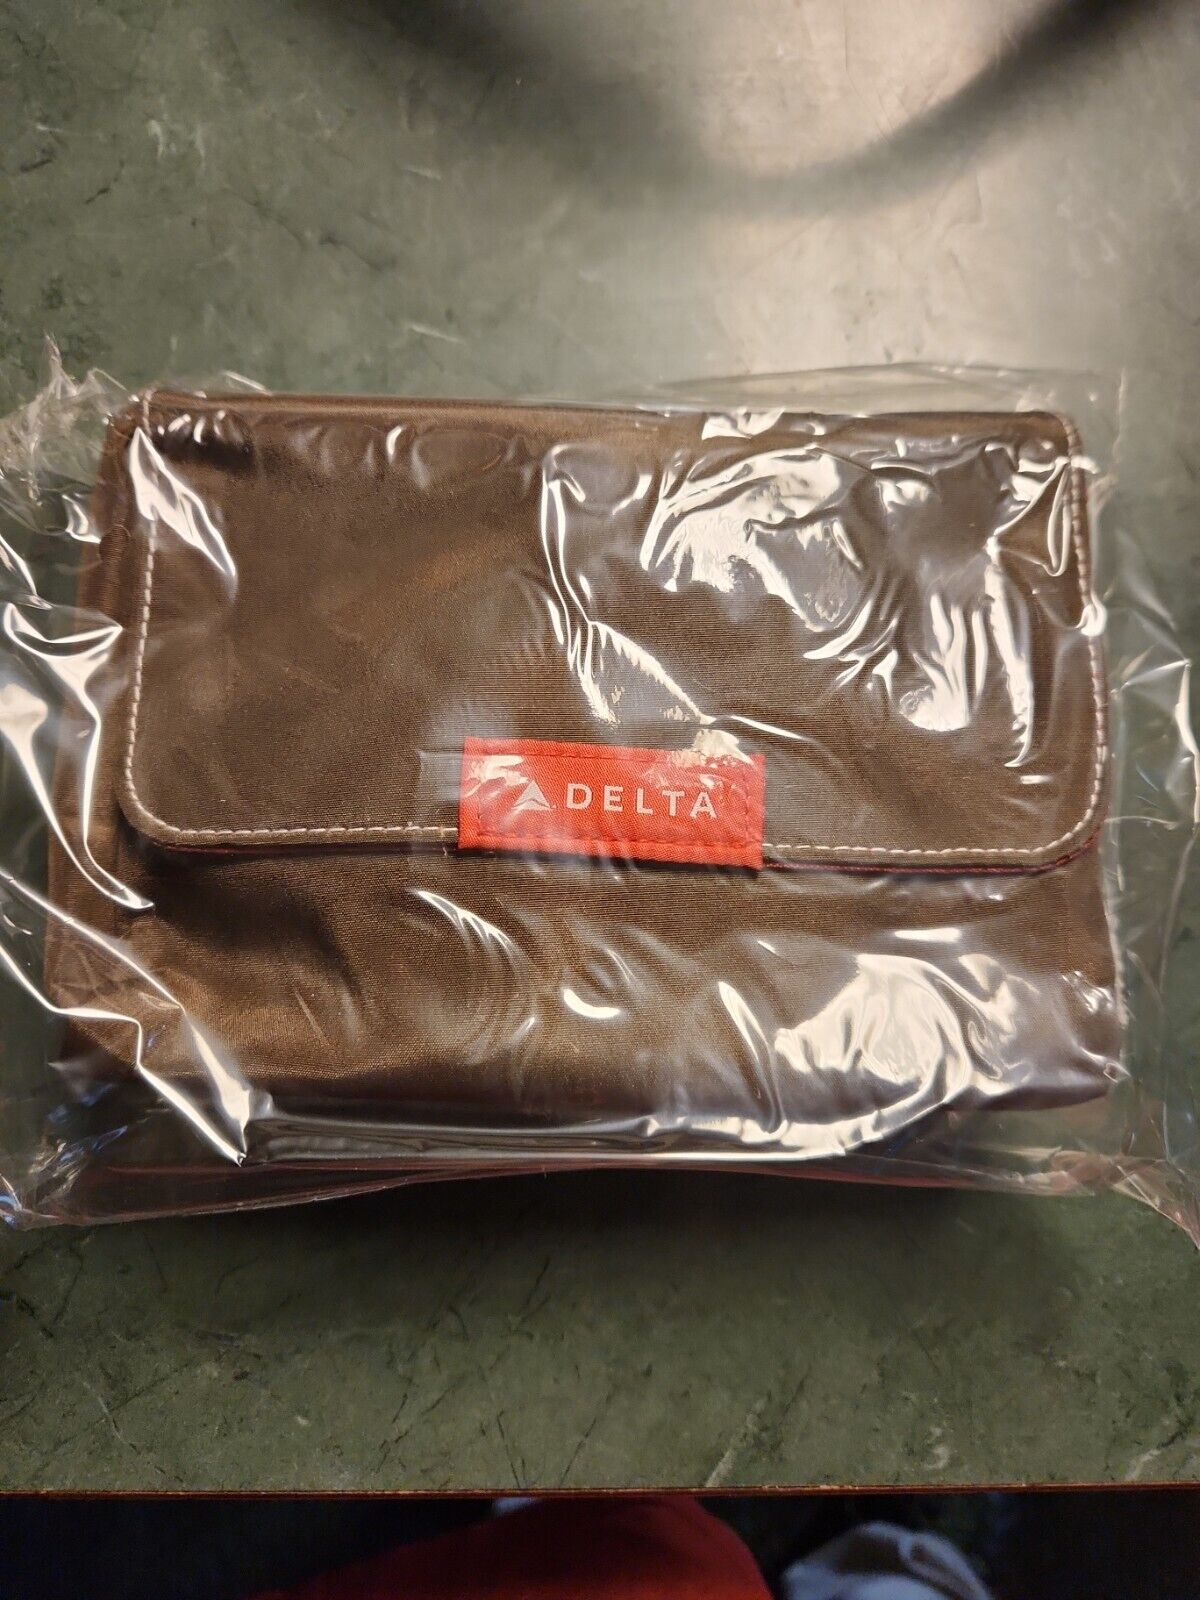 New Delta Airlines Loaded Amenity Kit Bag First Class/Business Travel